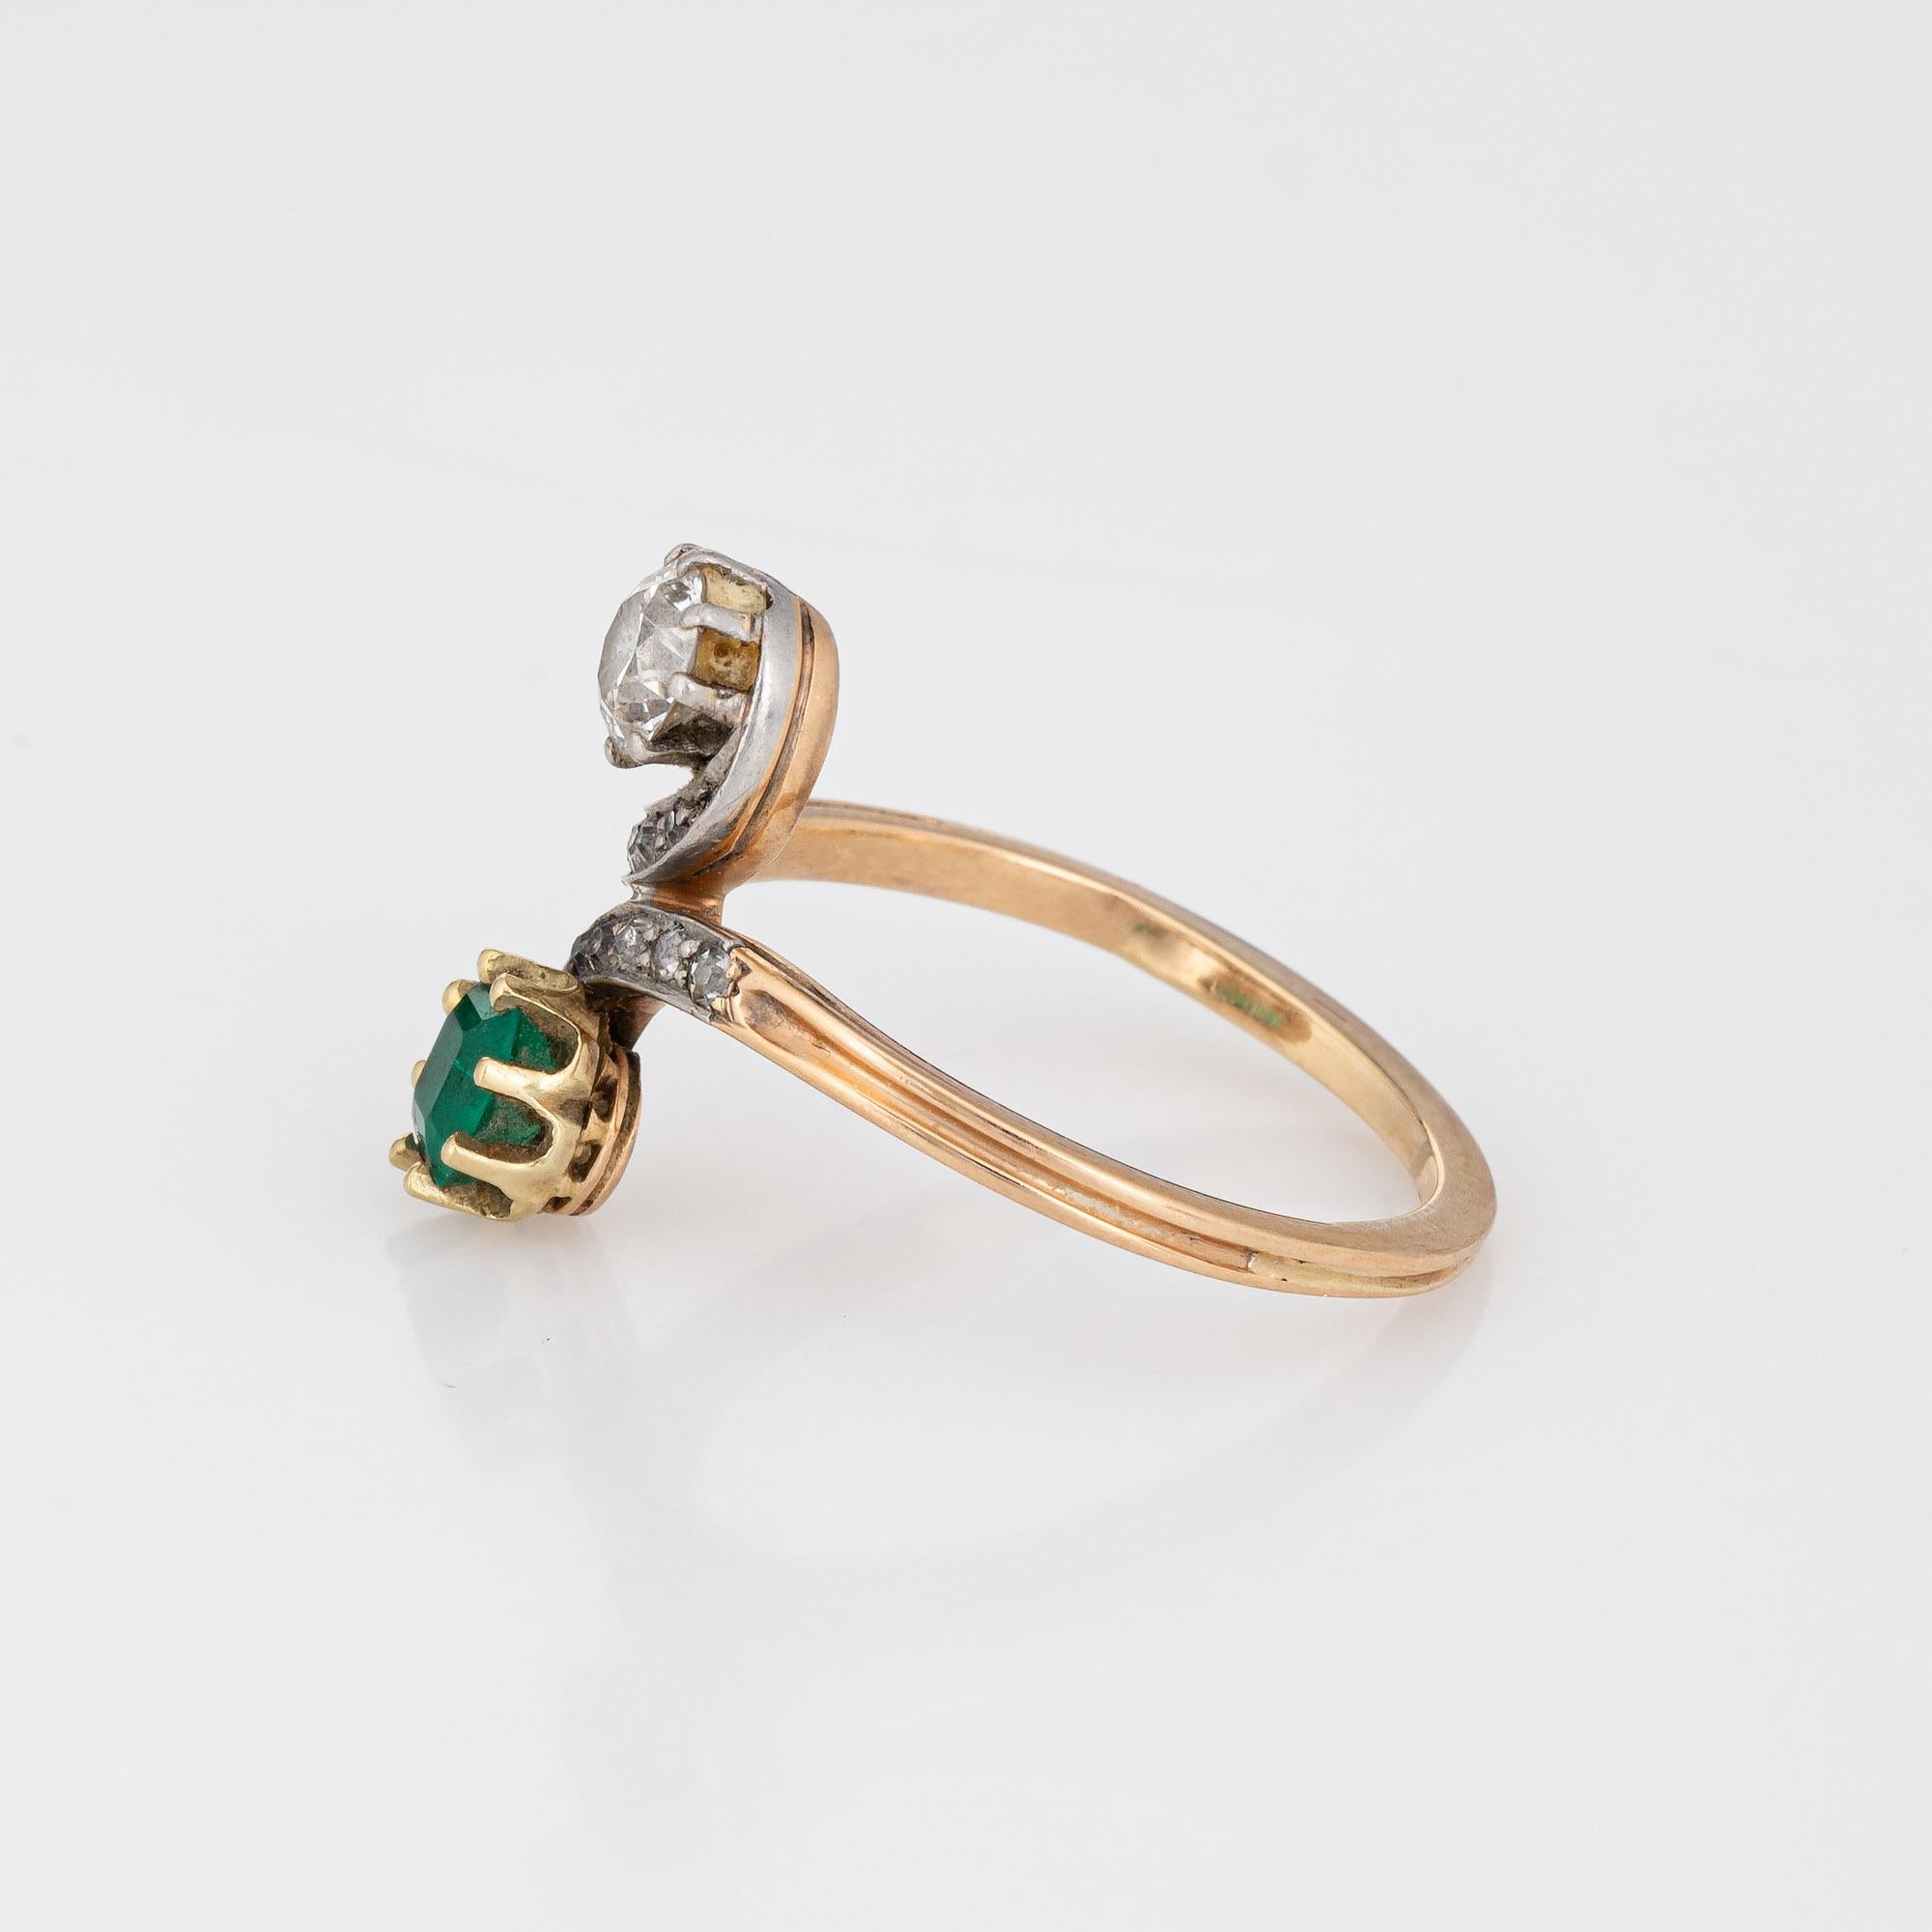 Antique Edwardian Diamond Emerald Ring Moi et Toi 14k Gold Gemstone Band Sz 6.5 In Good Condition For Sale In Torrance, CA